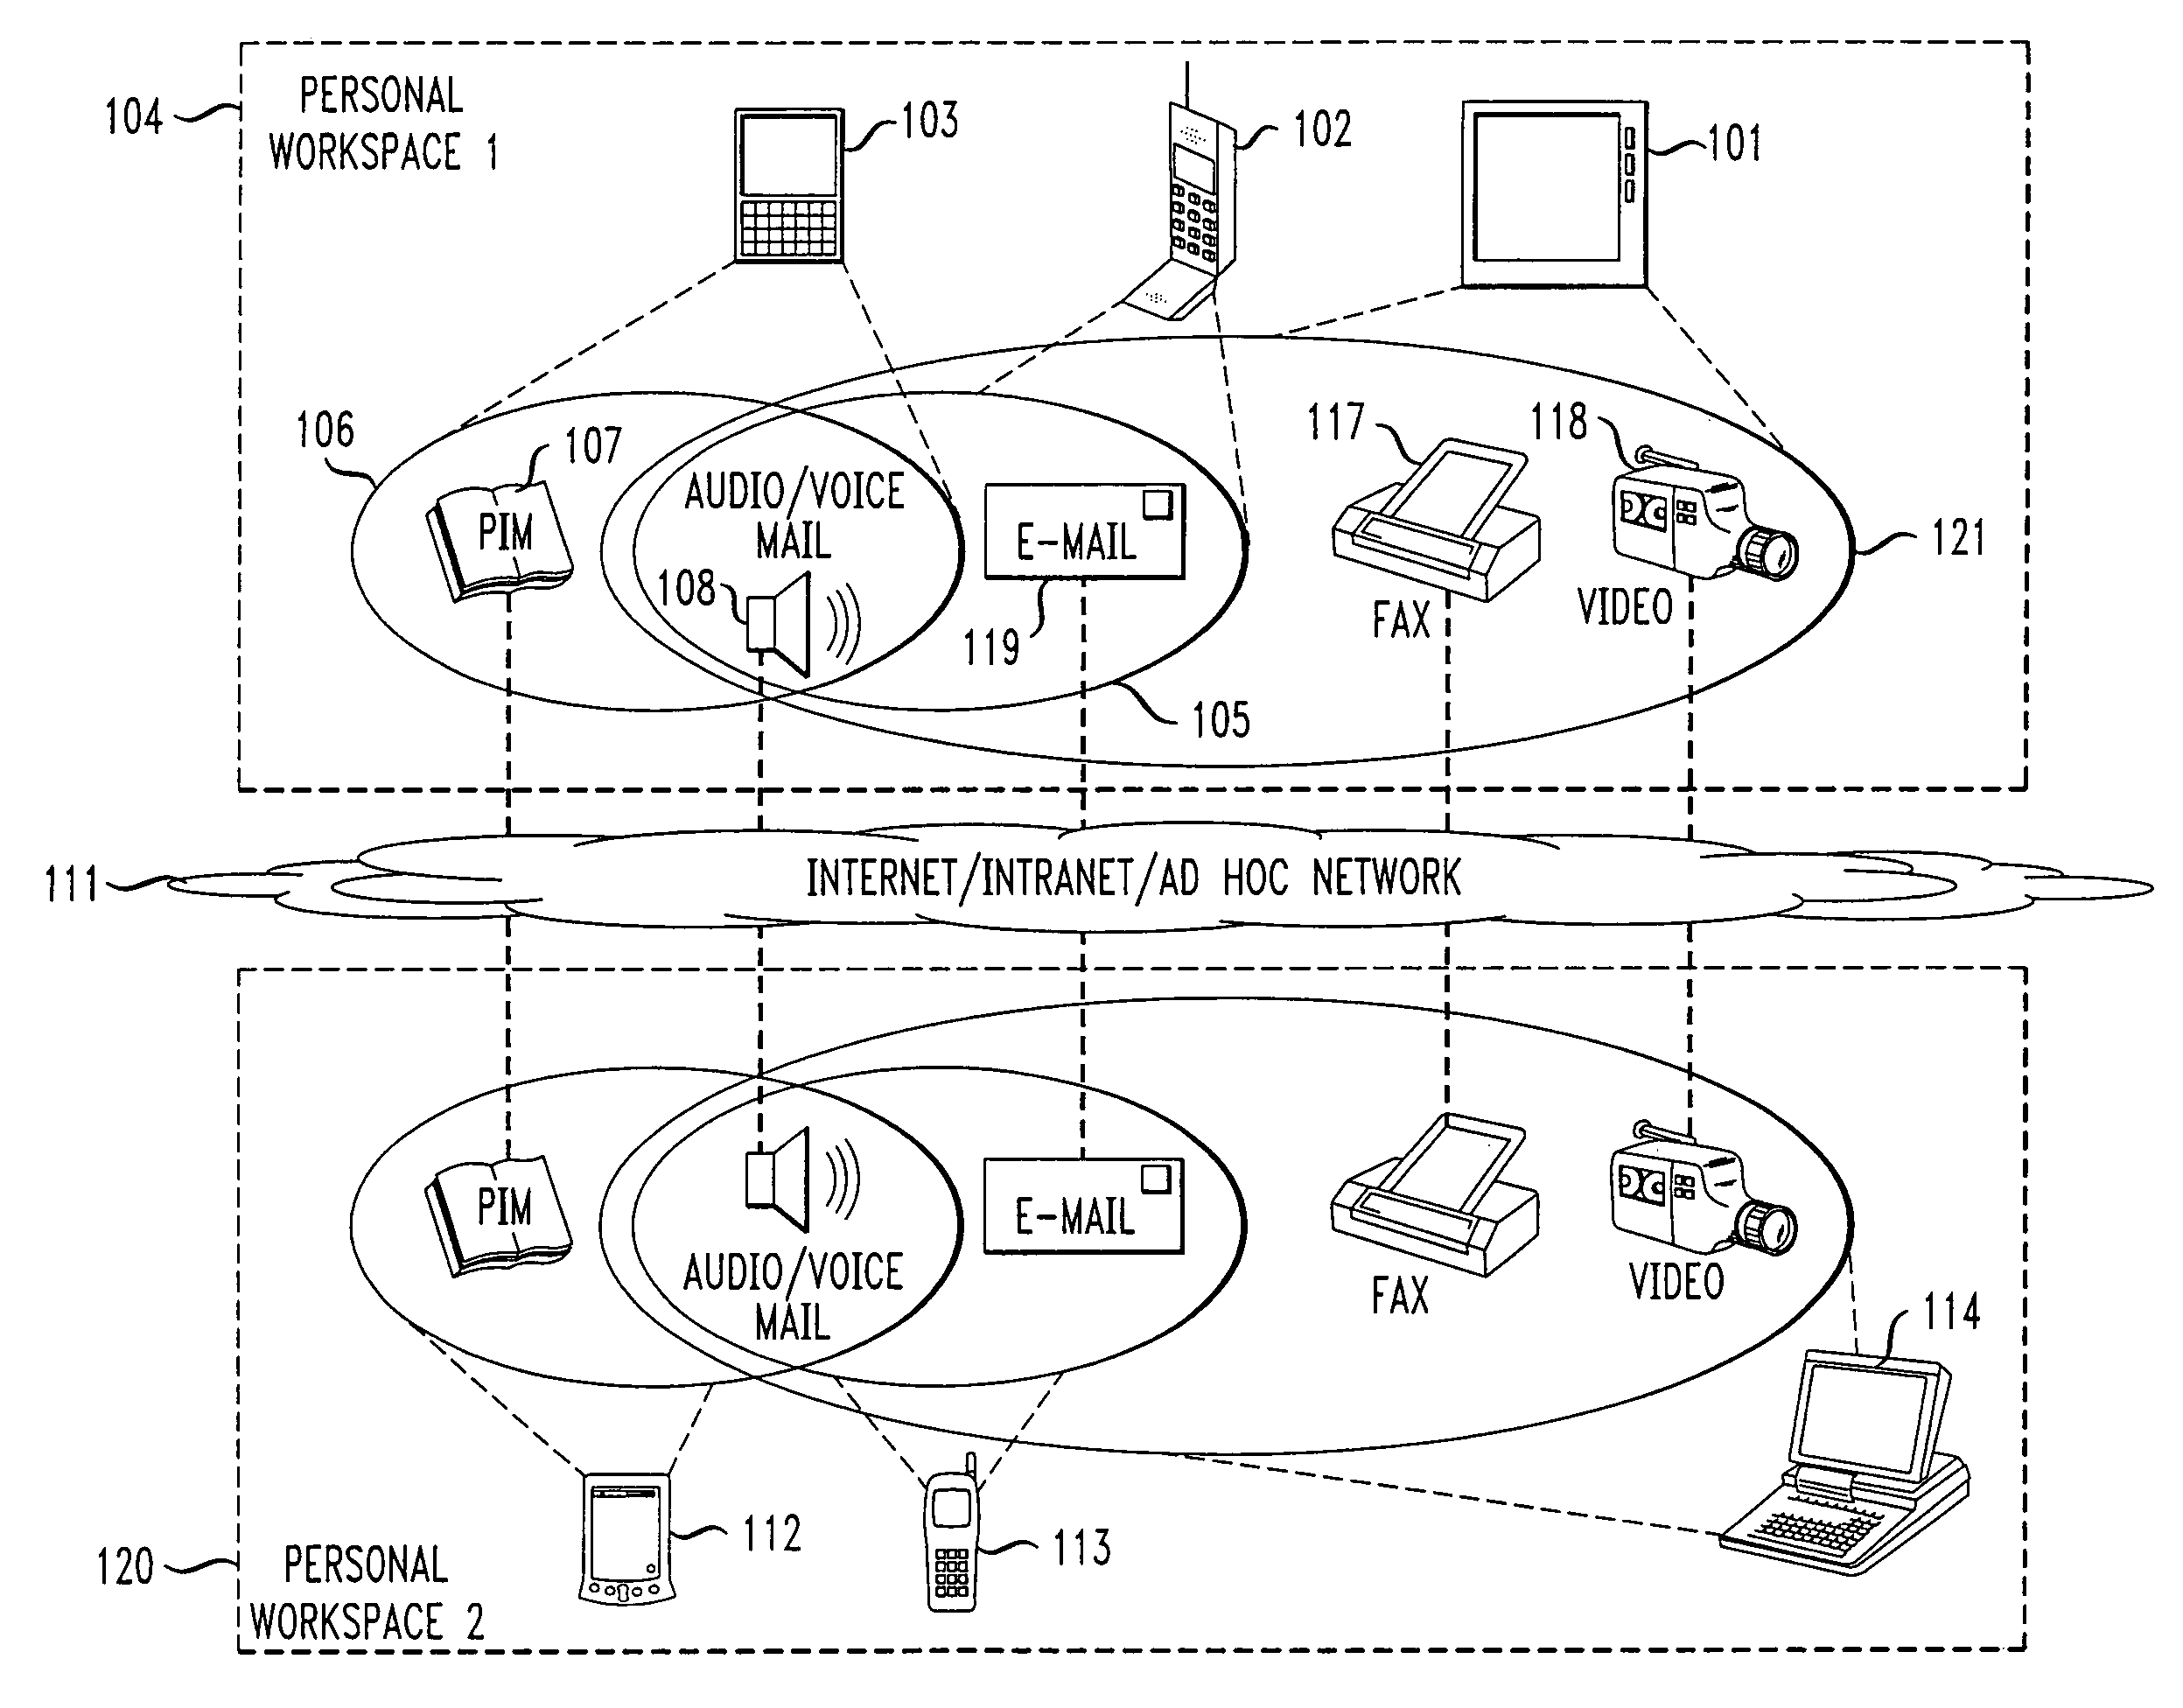 Techniques for providing a virtual workspace comprised of a multiplicity of electronic devices